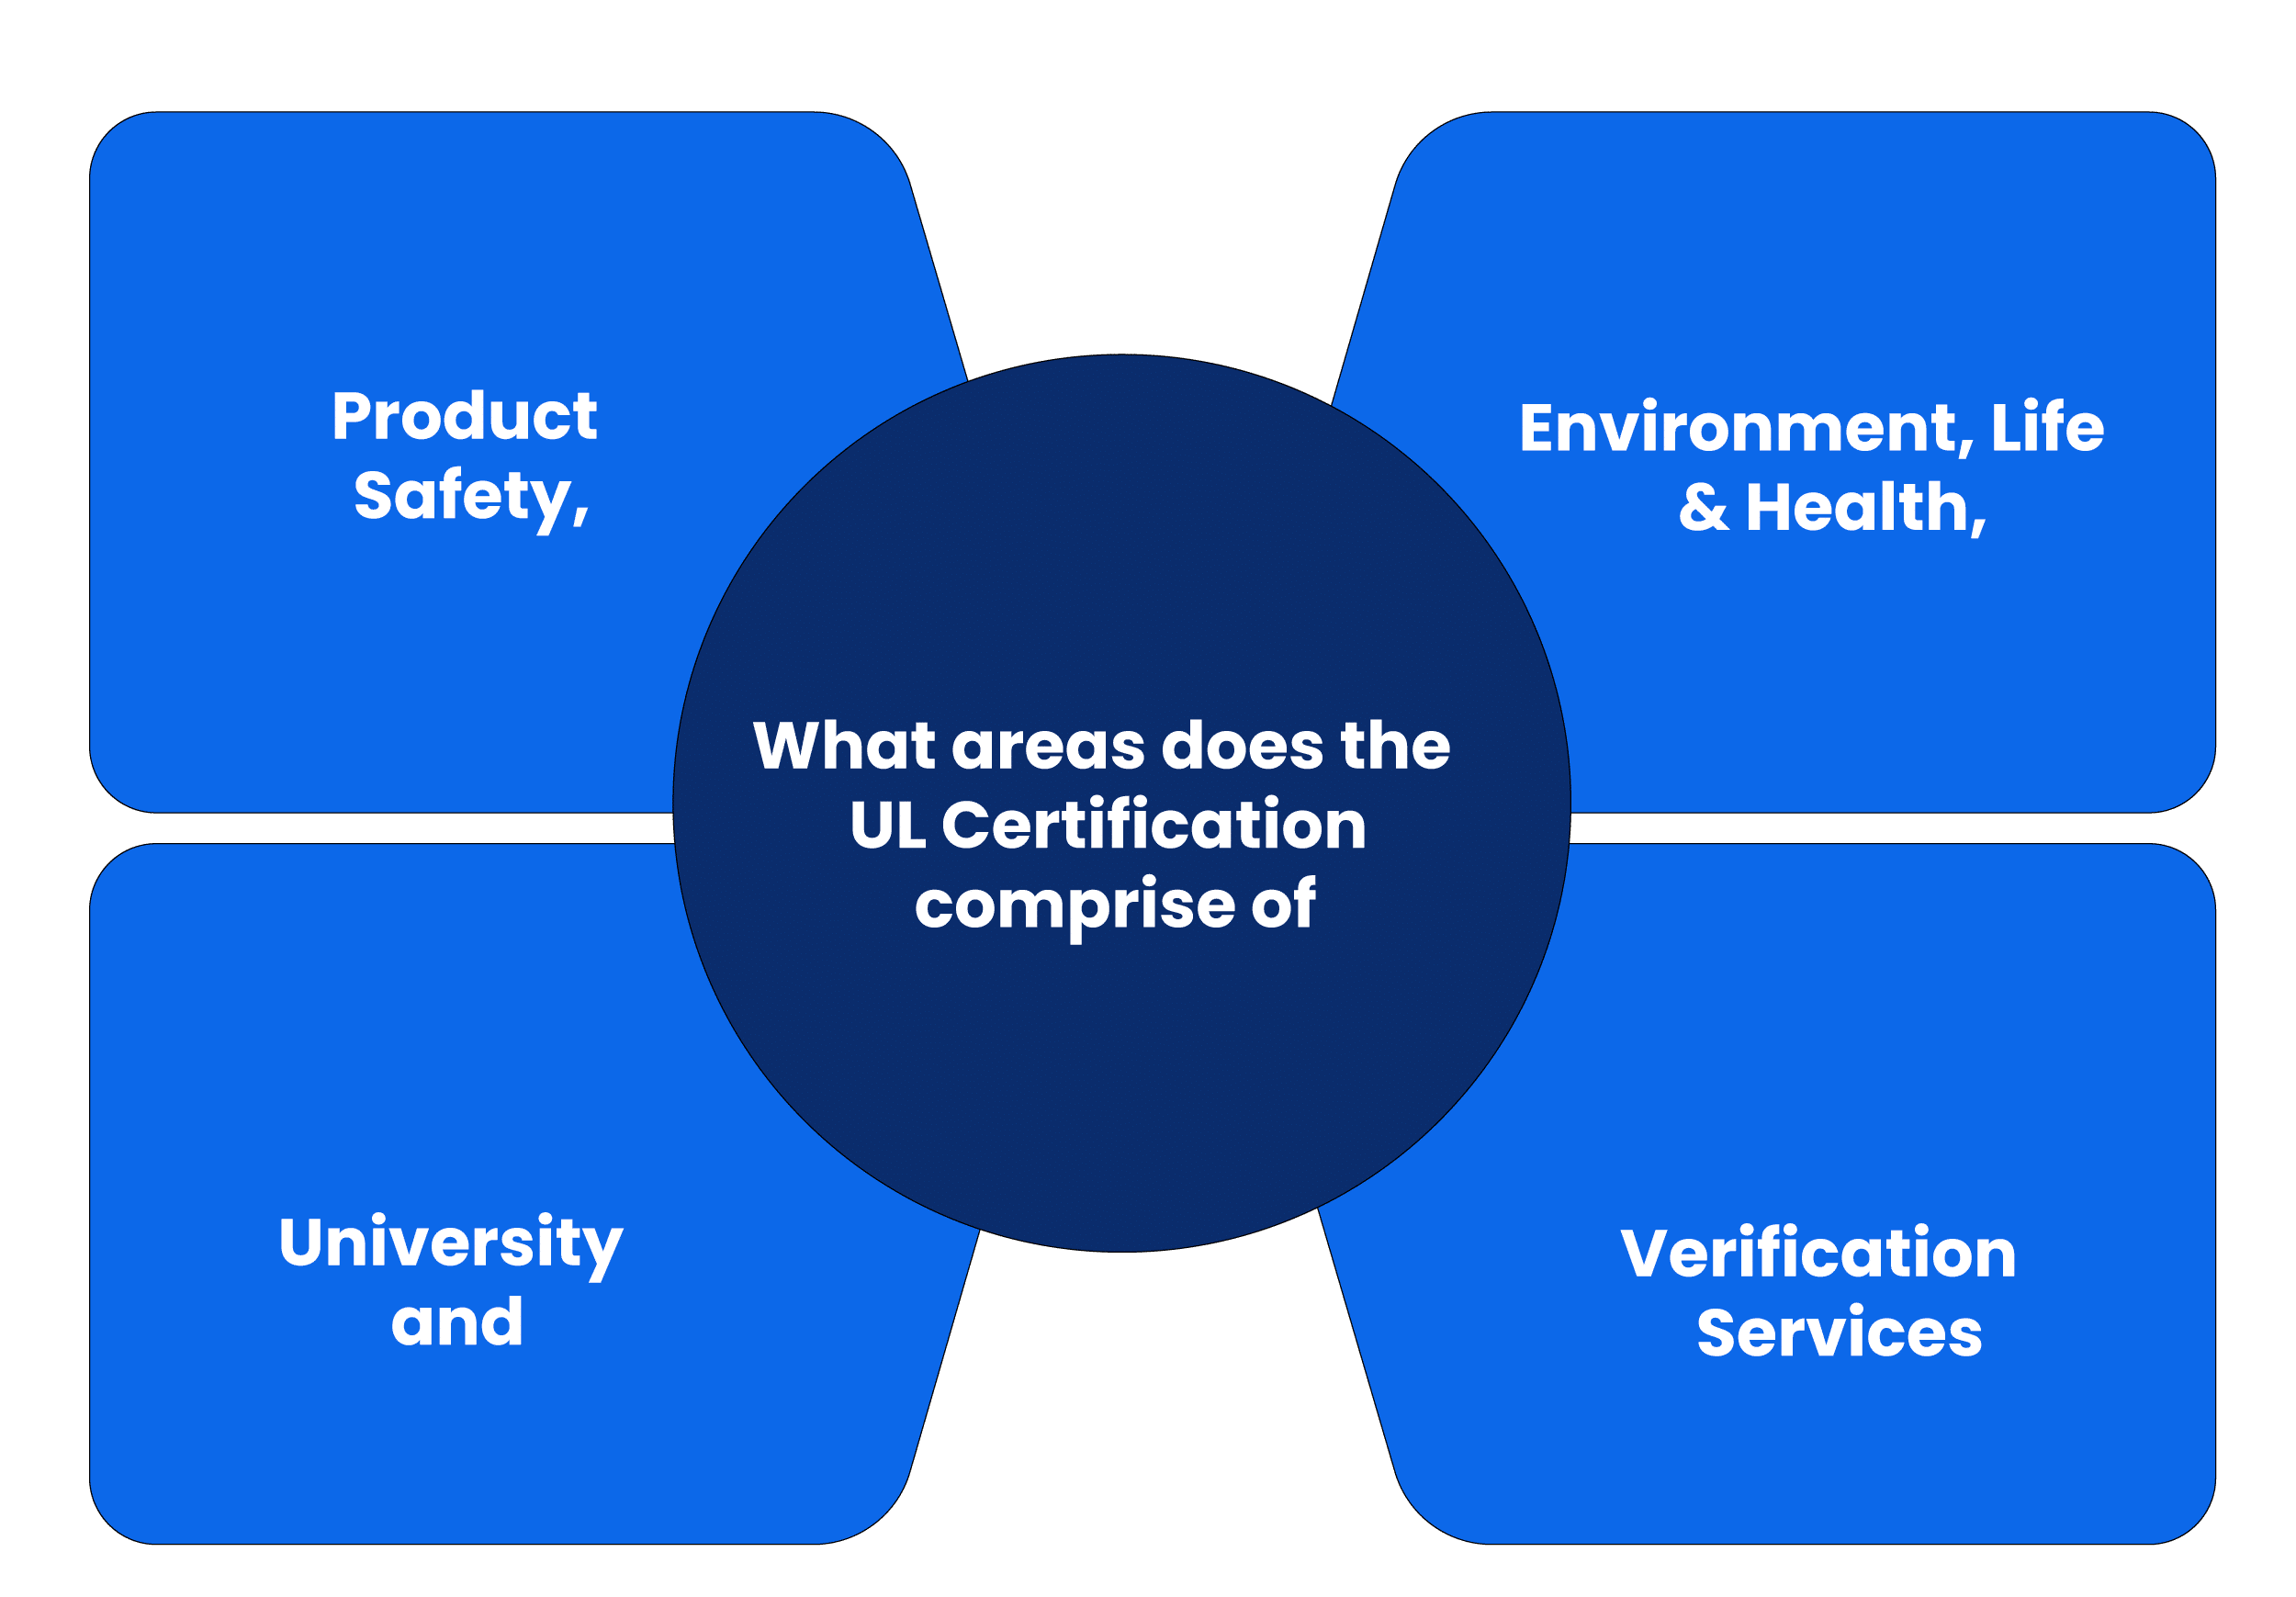 What areas does the UL Certification comprise of